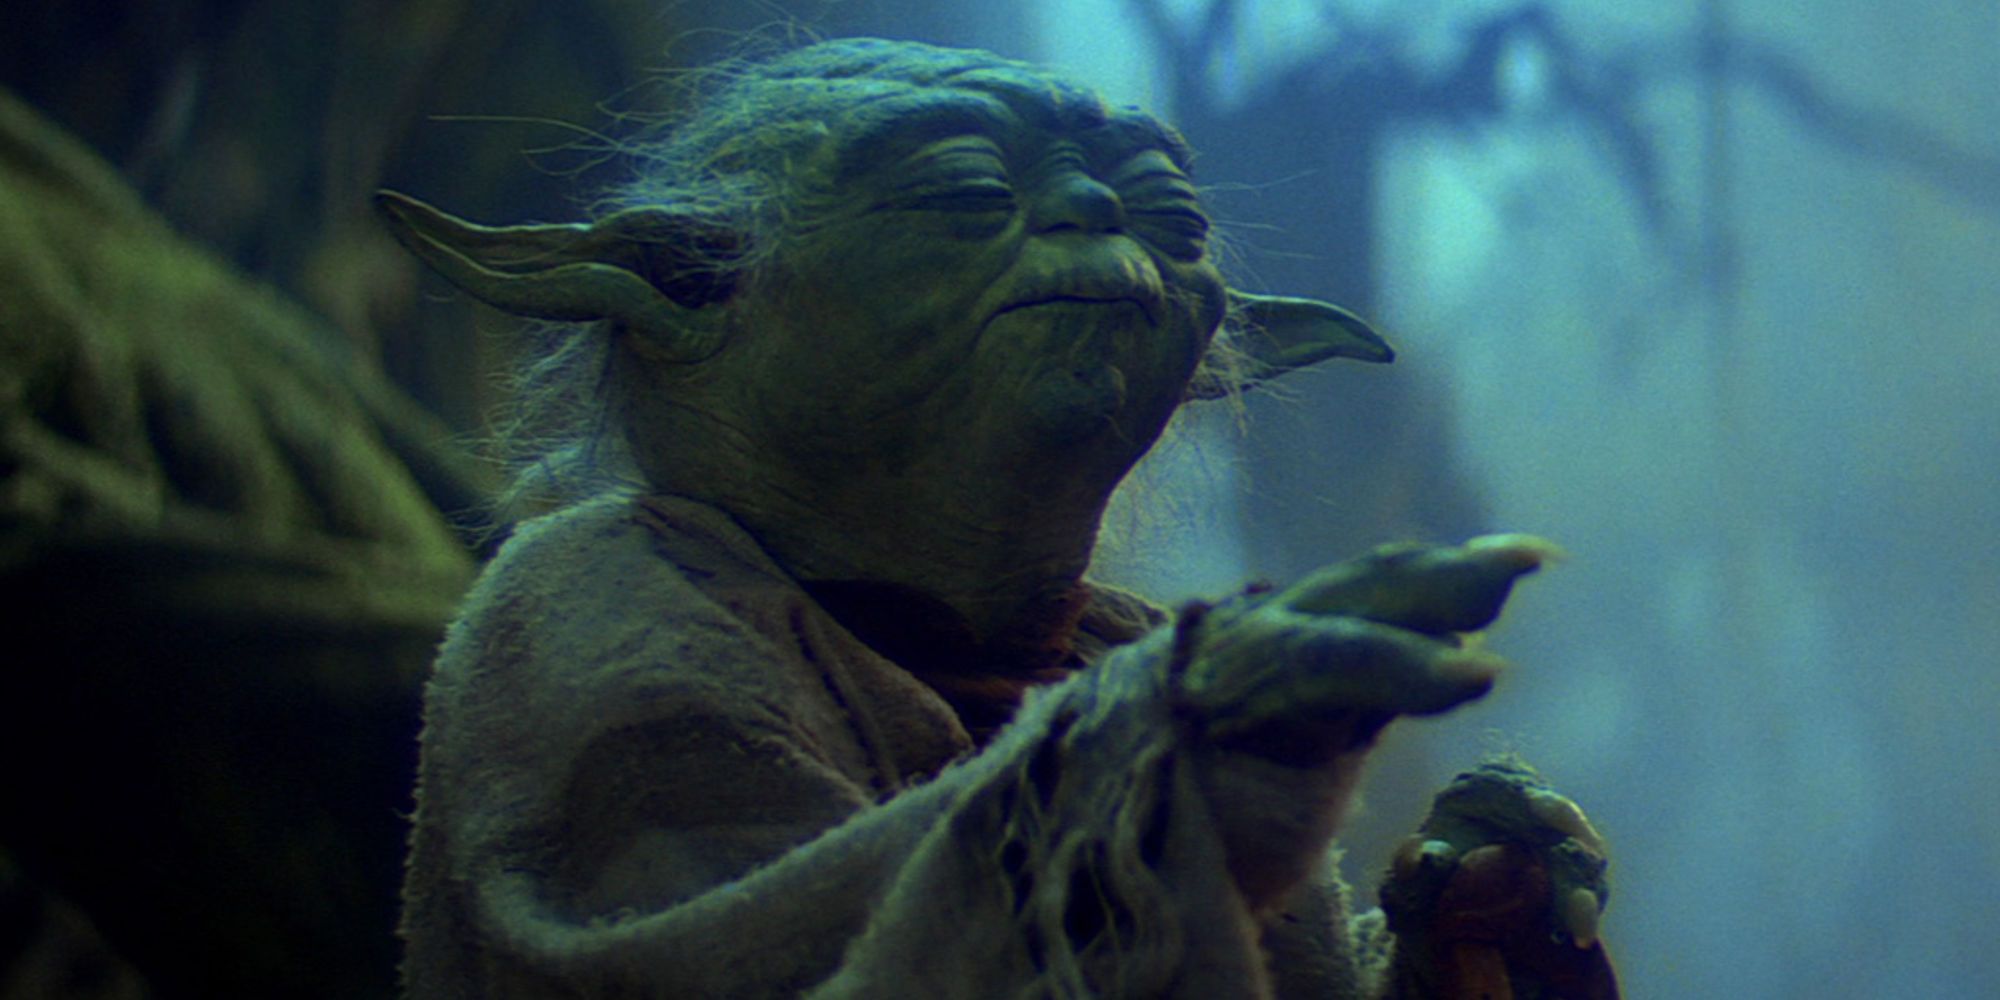 Yoda with his hand raised and eyes closed as he lifts Luke's X-Wing out of the swamp